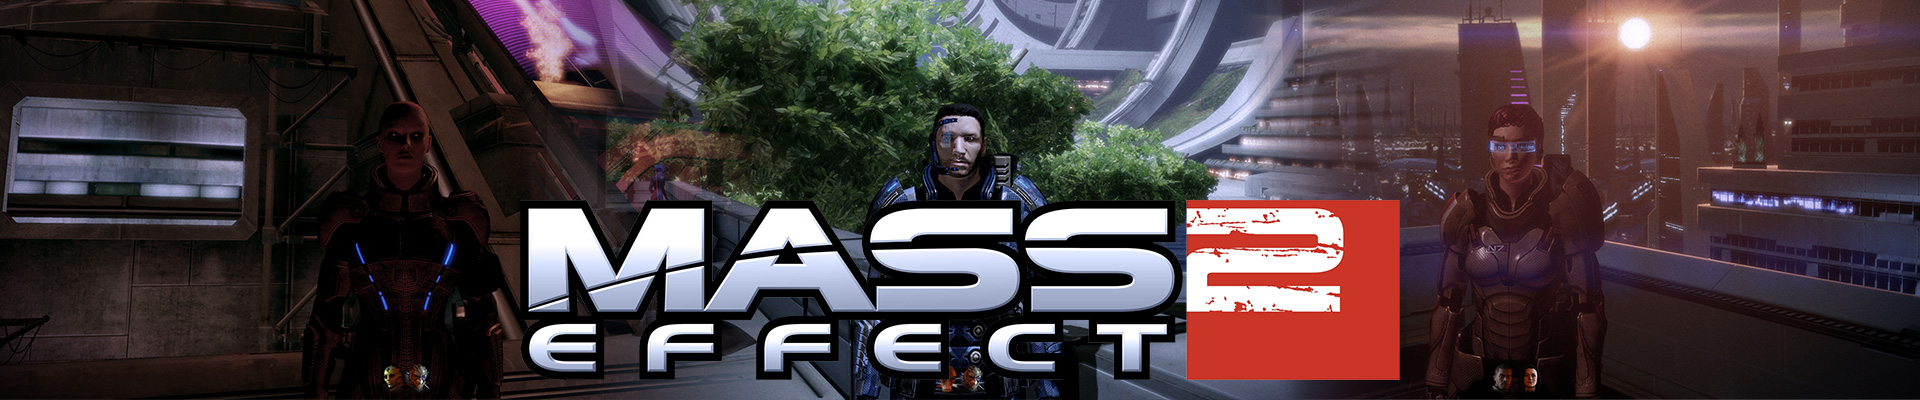 Revisiting Mass Effect 2 (with DLCs)